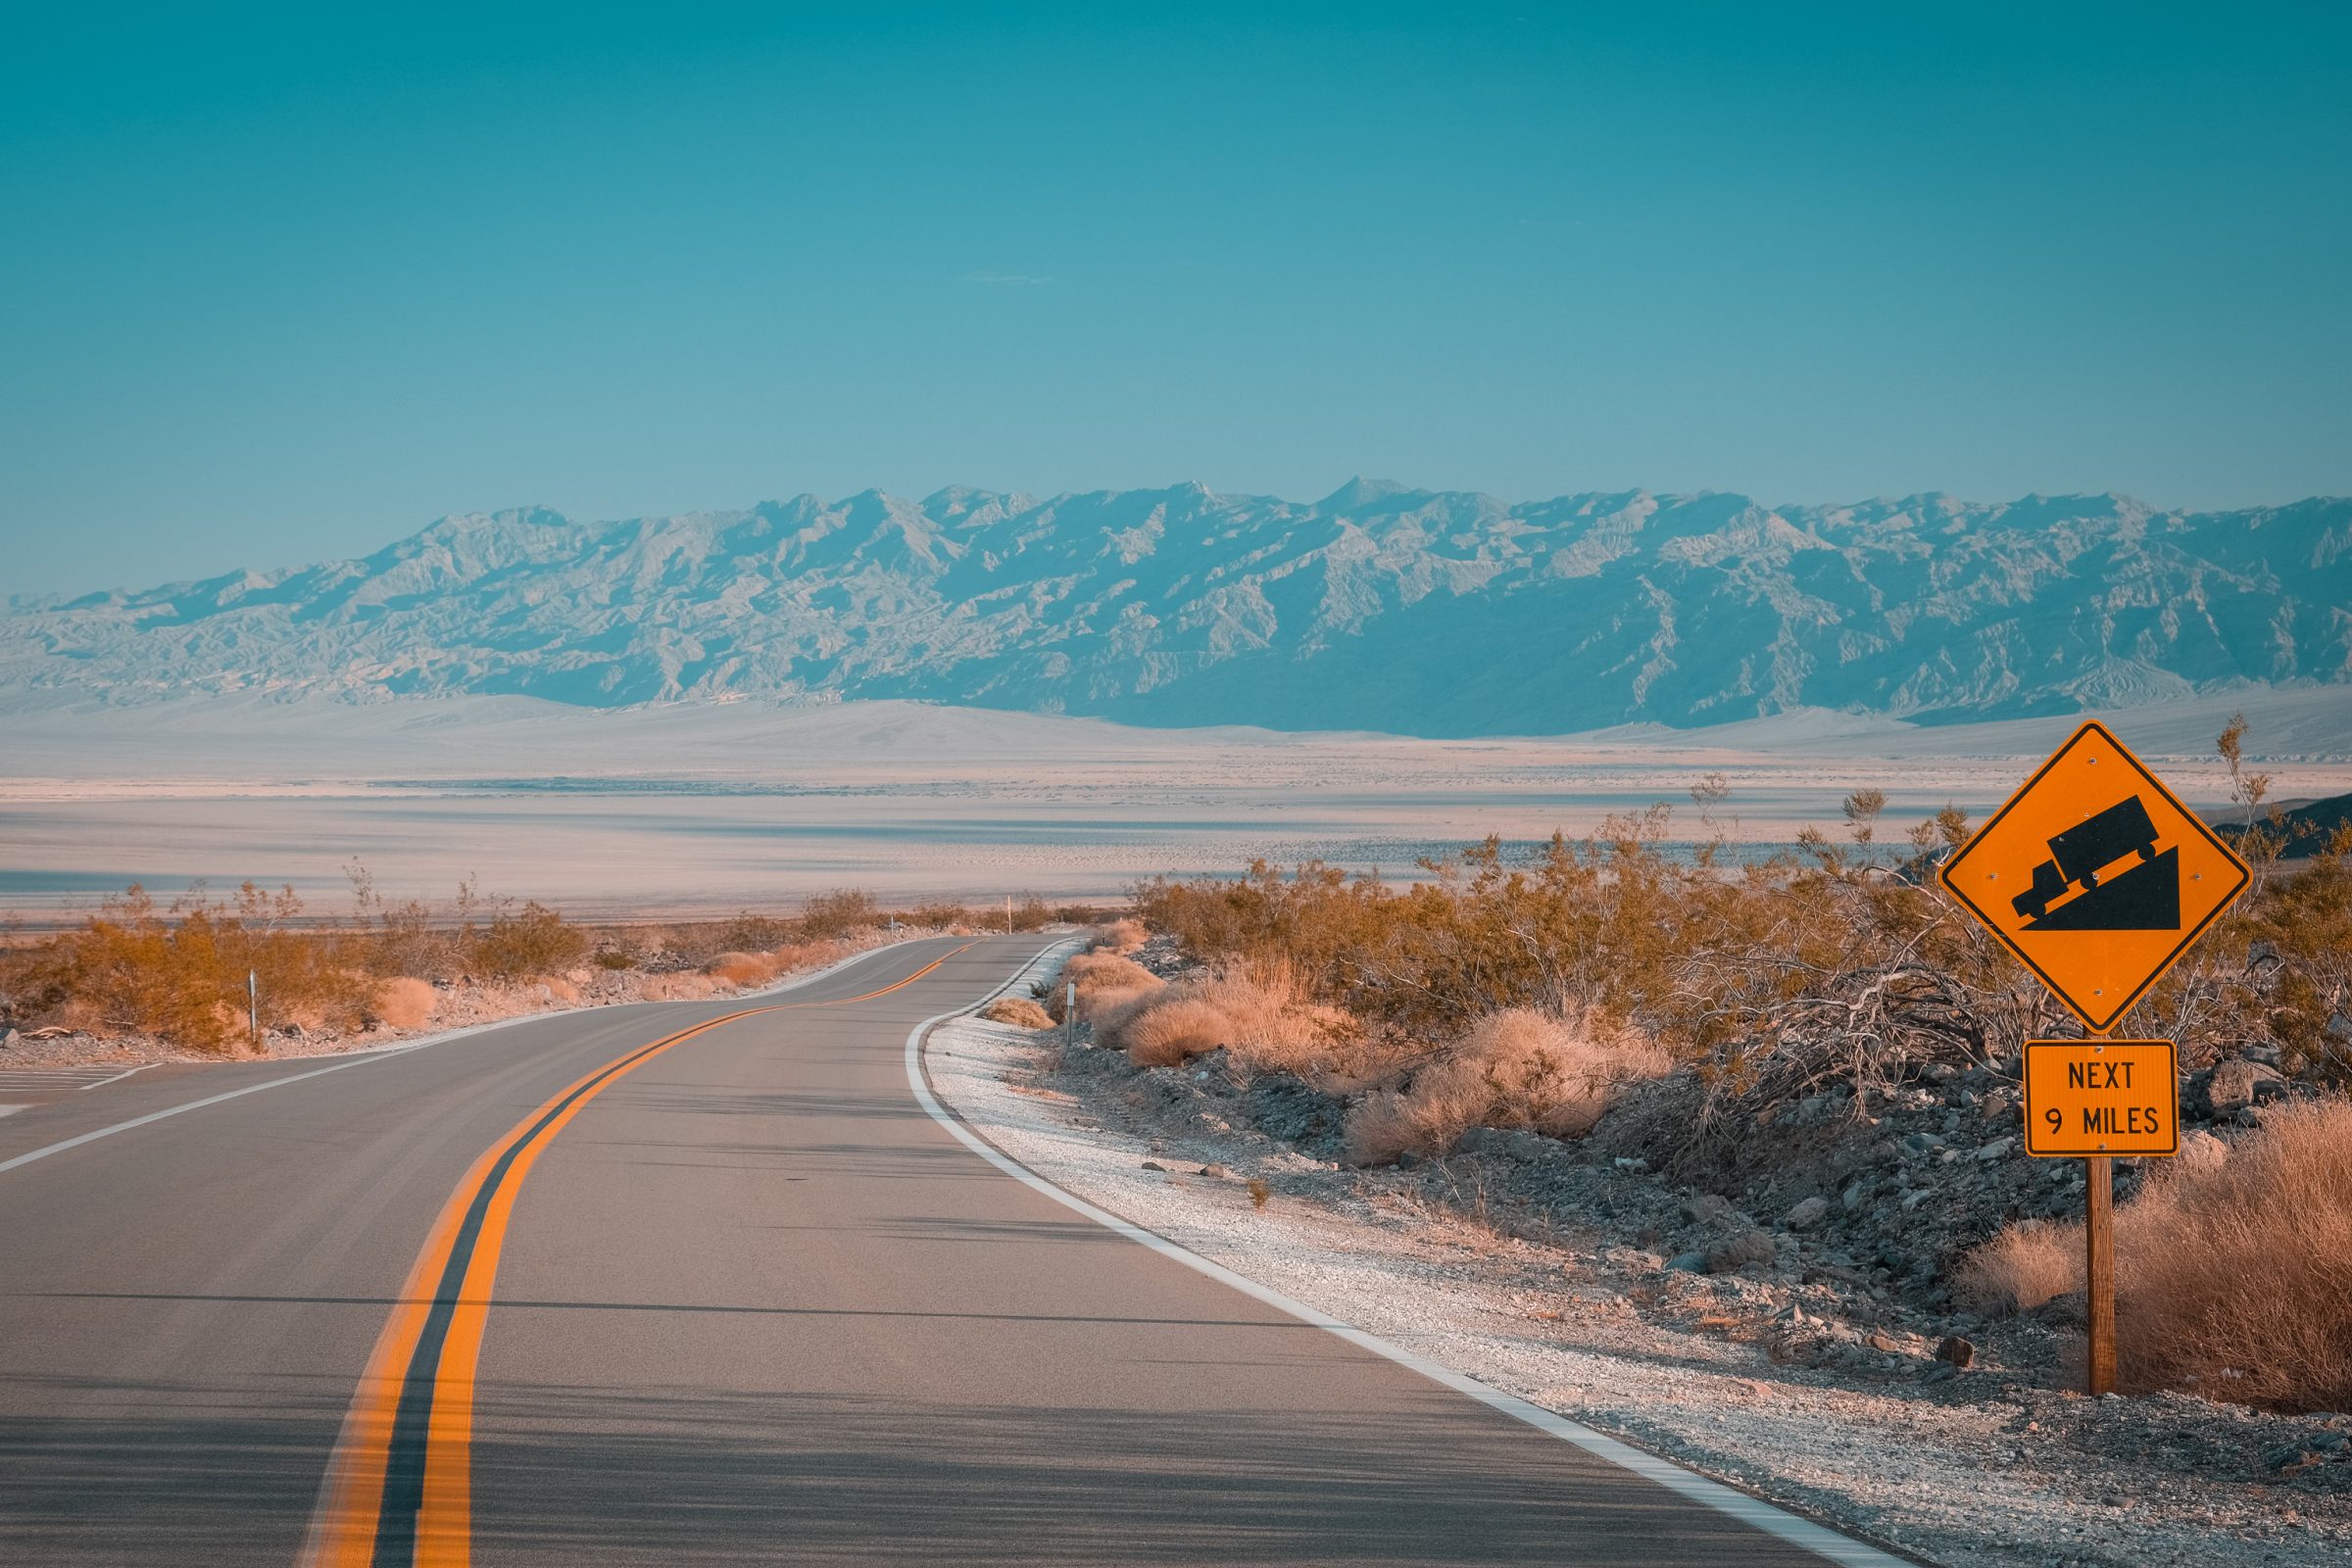 In Death Valley, chances are your engine will get hot. Keep a close eye on the temperature of your engine.